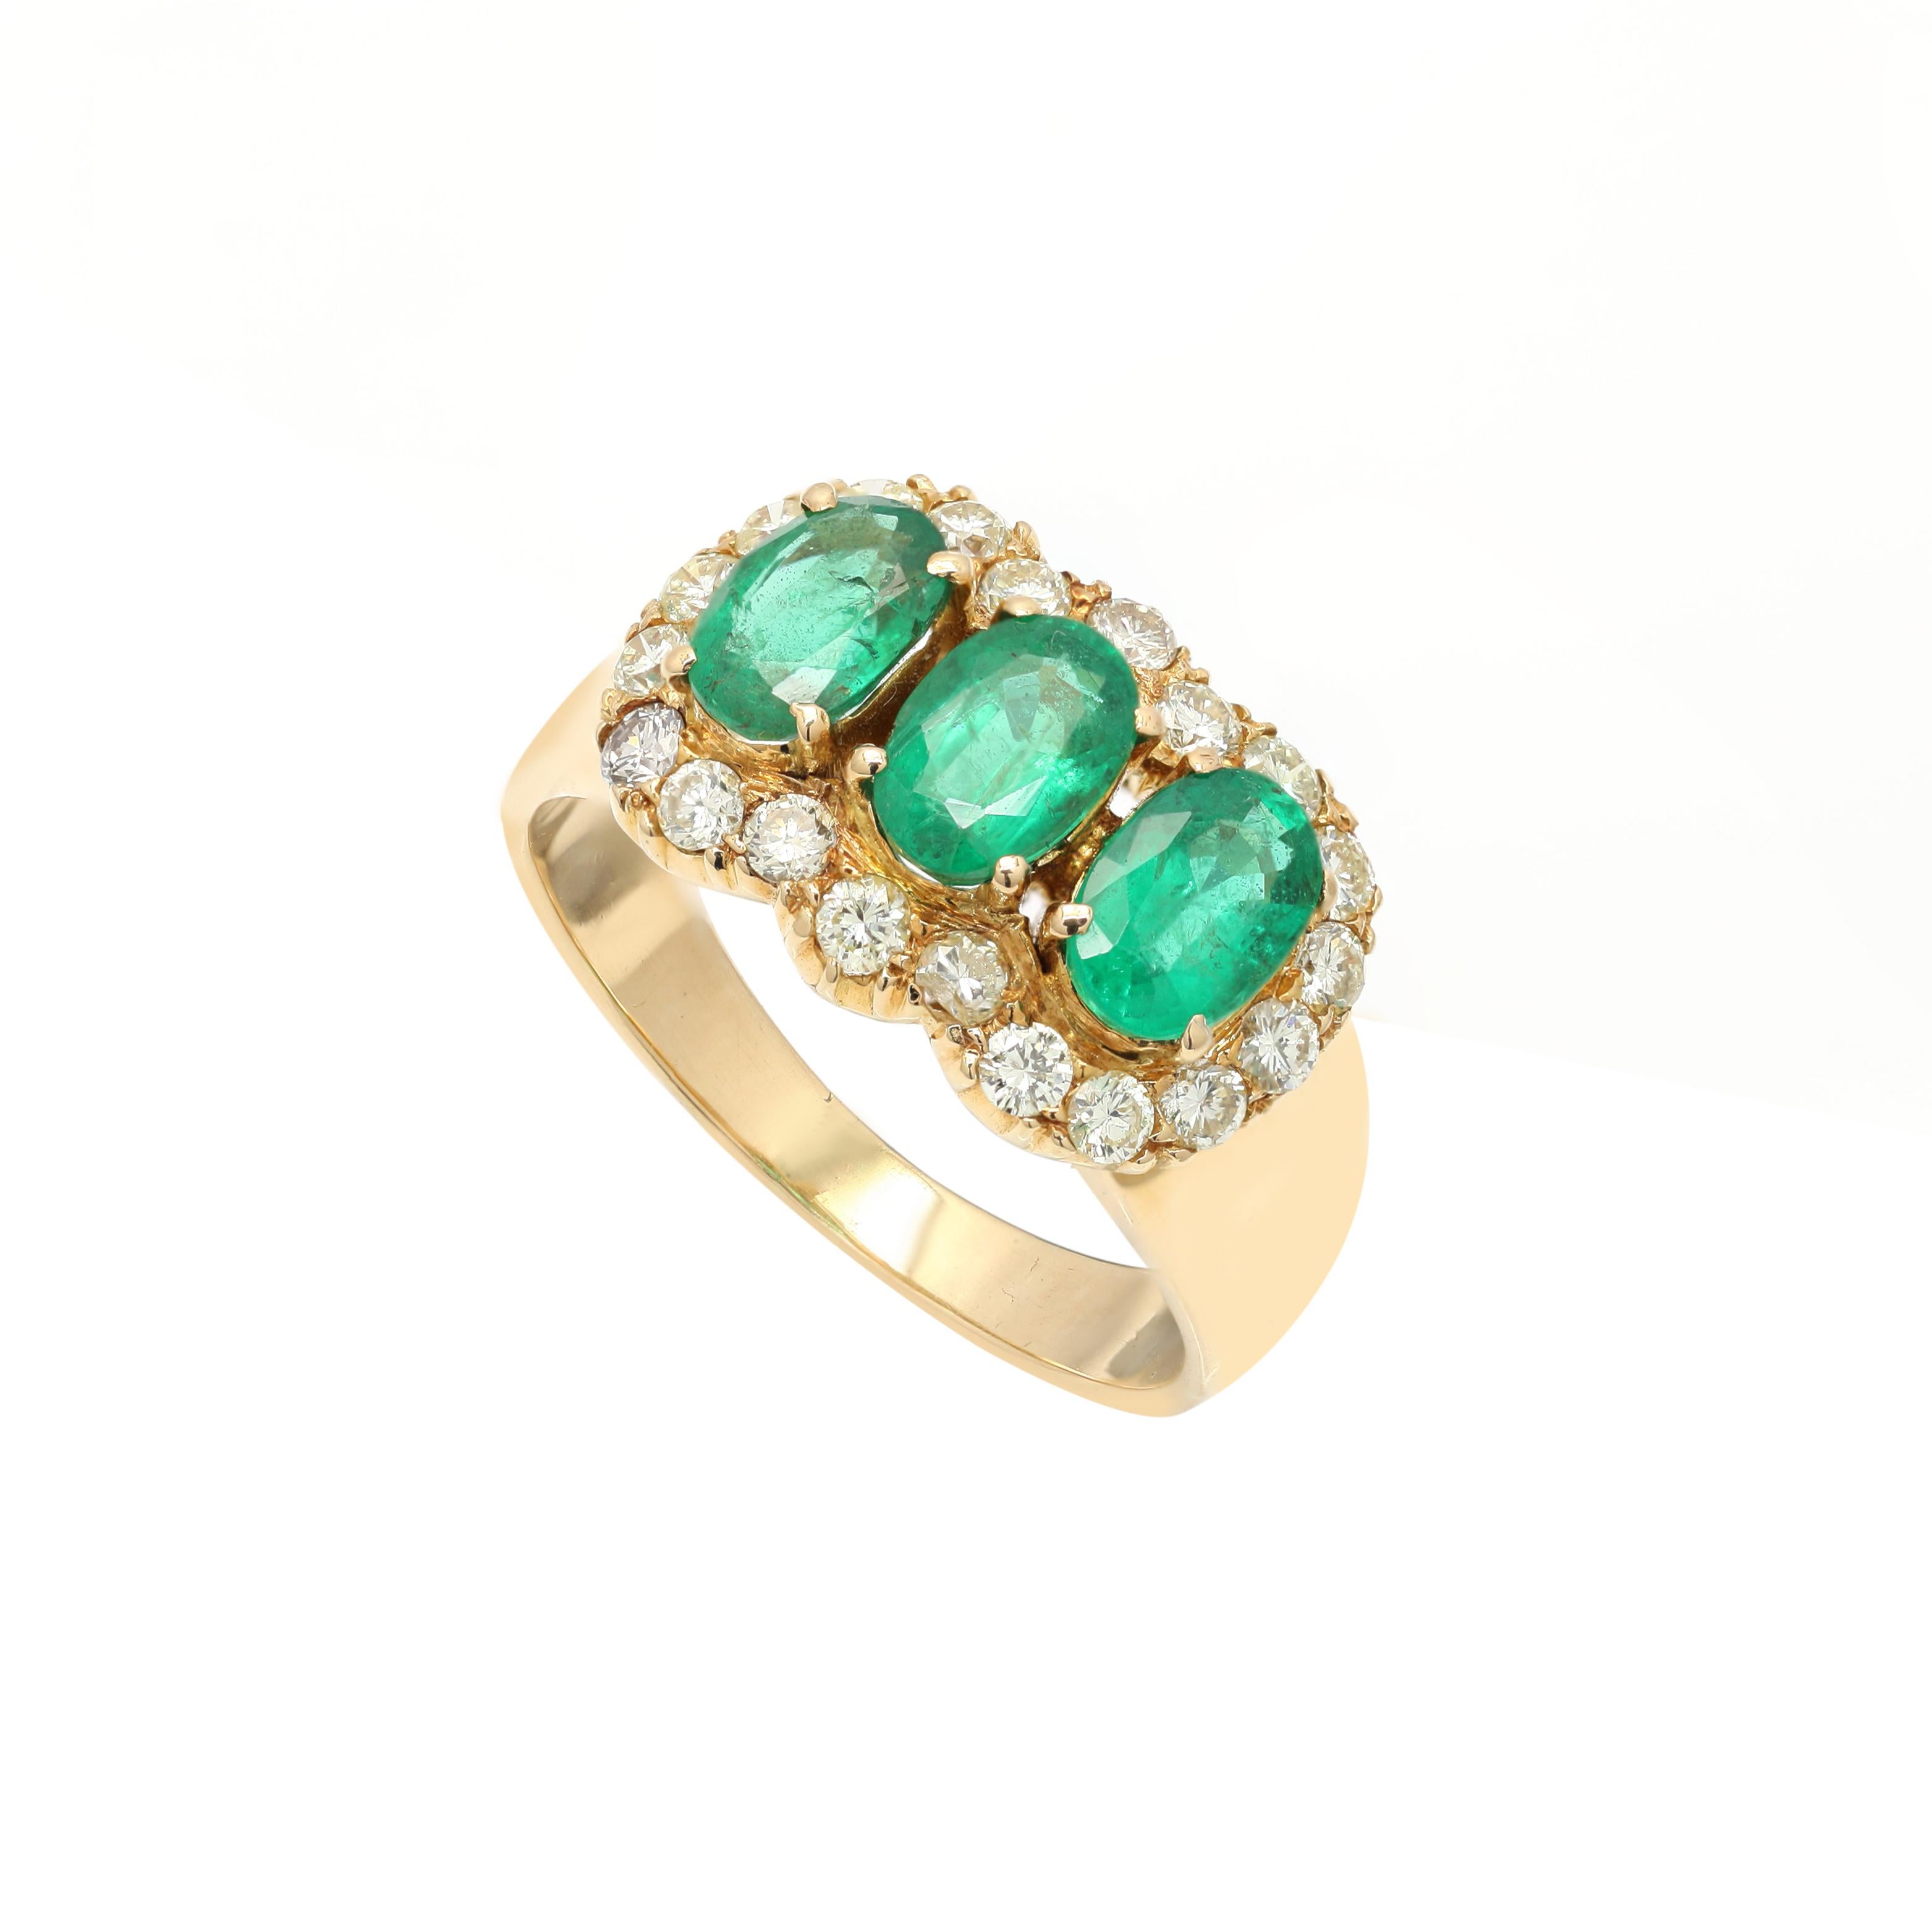 For Sale:  Estate 2.1 ct Oval Emerald Ring with Diamonds Encircling in 18 Karat Yellow Gold 4